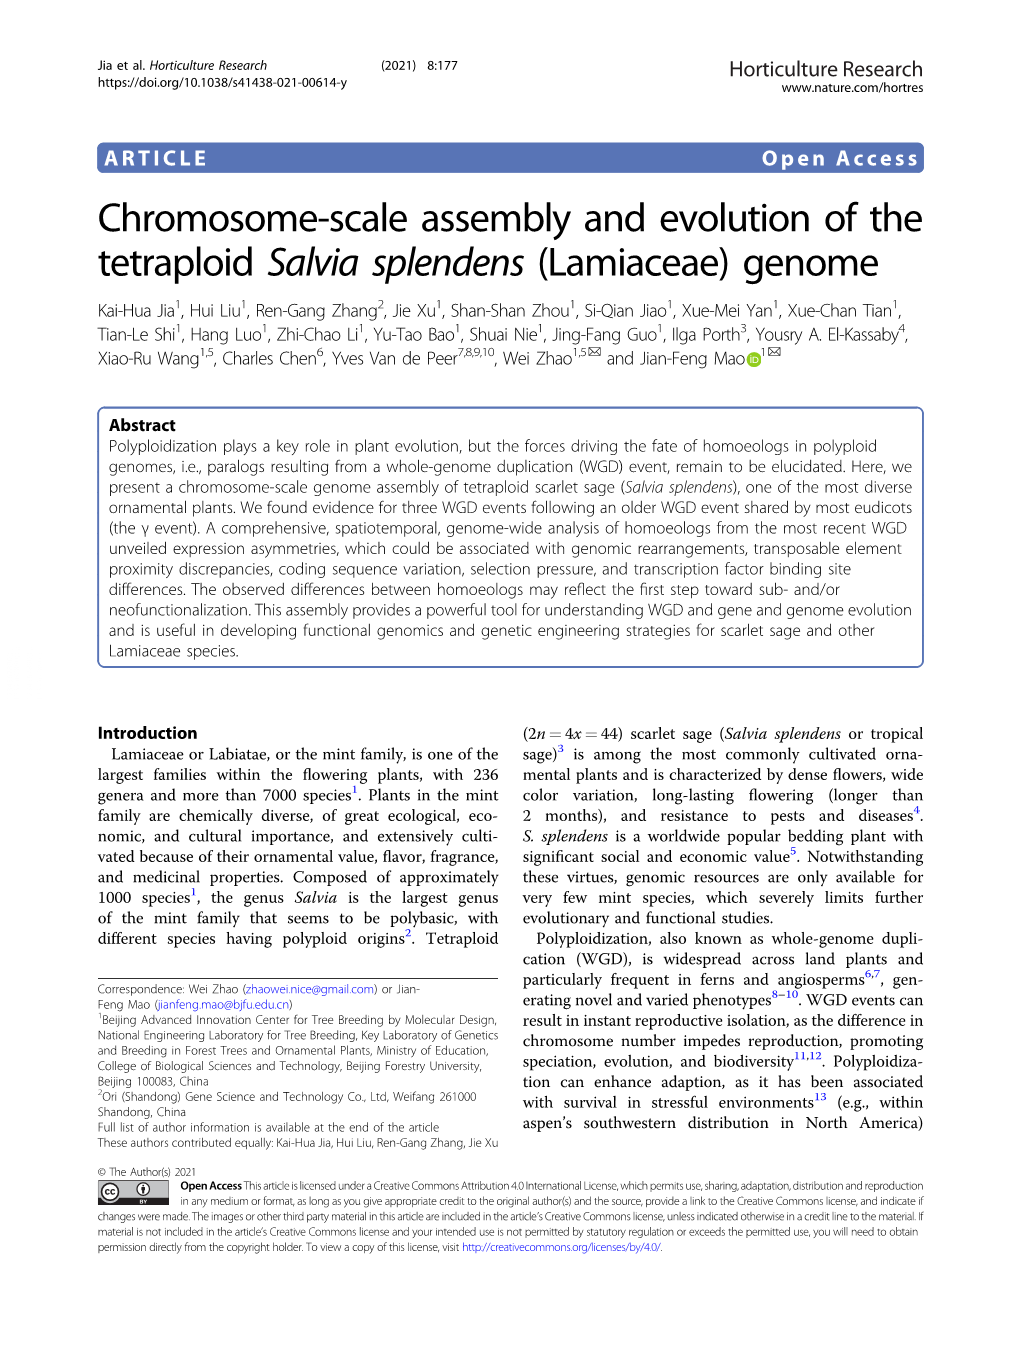 Chromosome-Scale Assembly and Evolution of the Tetraploid Salvia